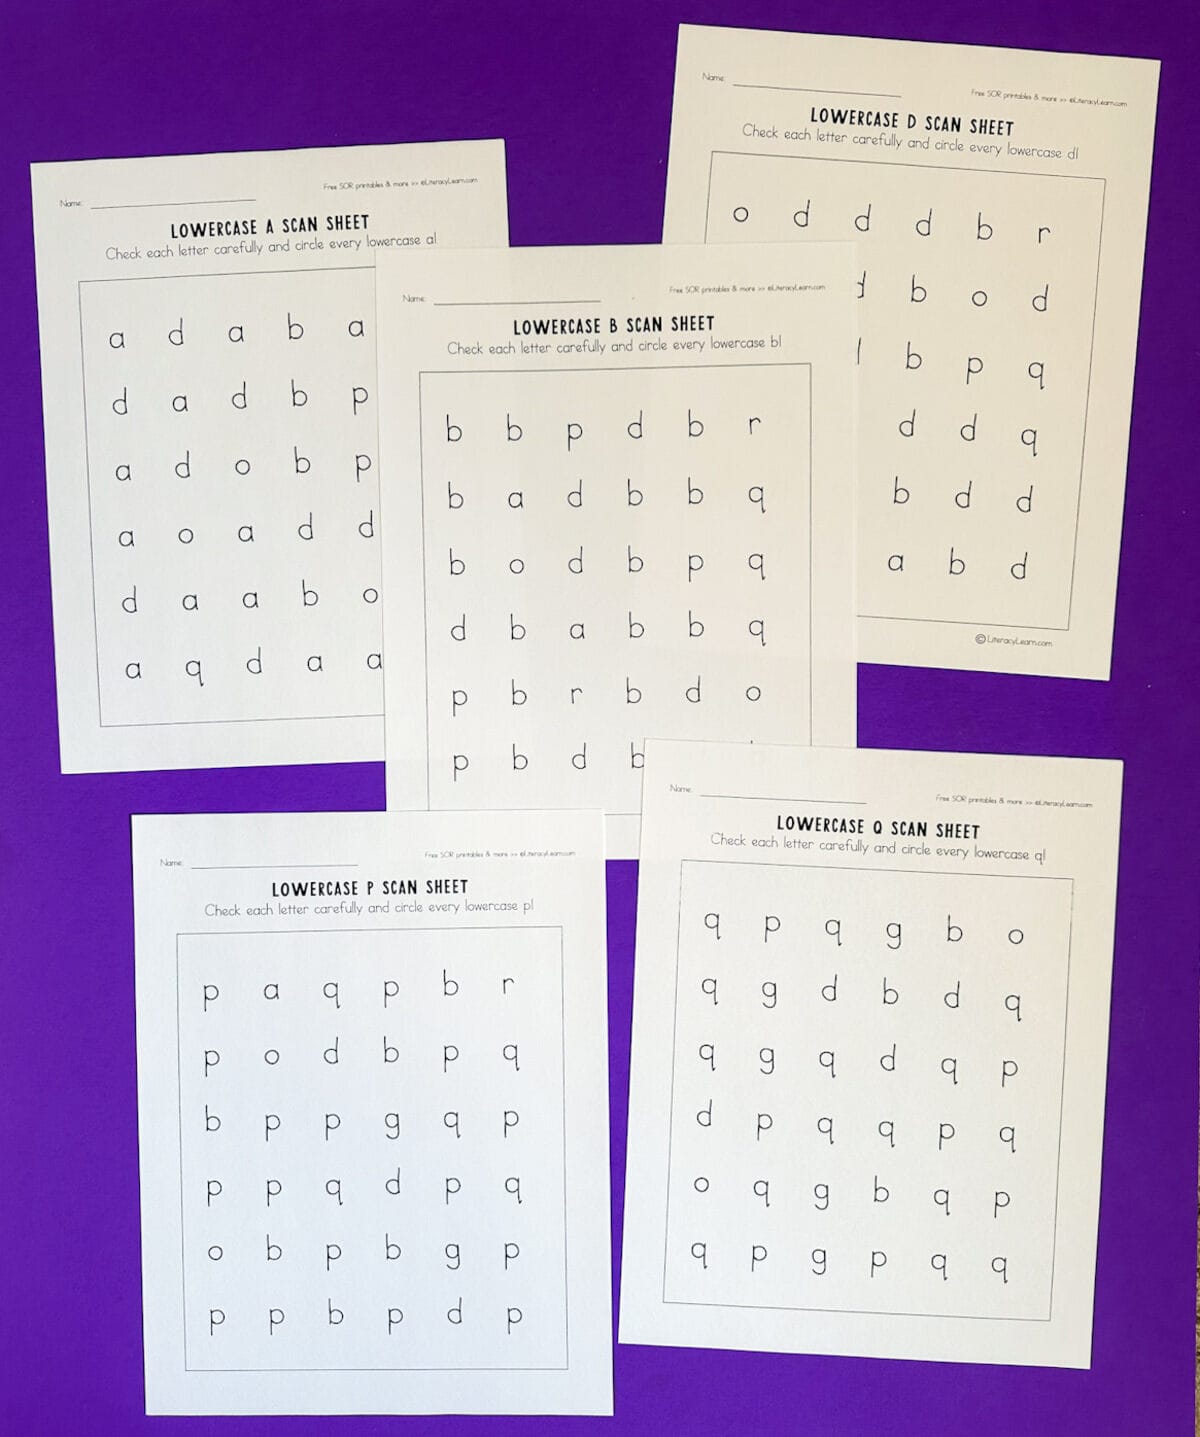 Four scan sheets for lowercase letters a, b, d, p, and q. 